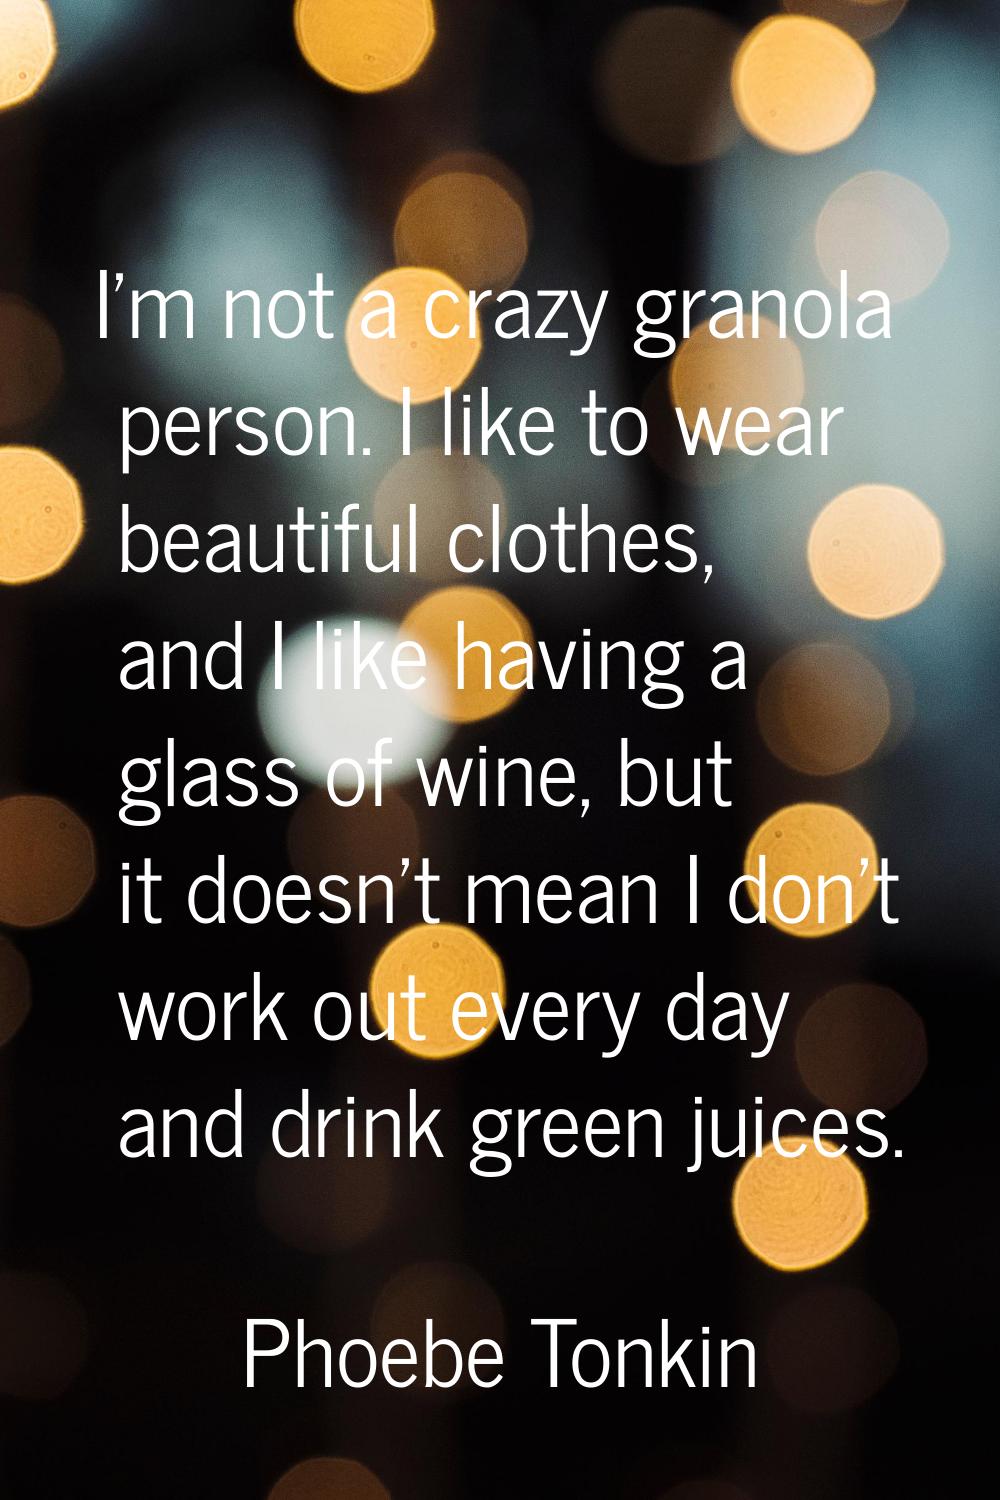 I'm not a crazy granola person. I like to wear beautiful clothes, and I like having a glass of wine